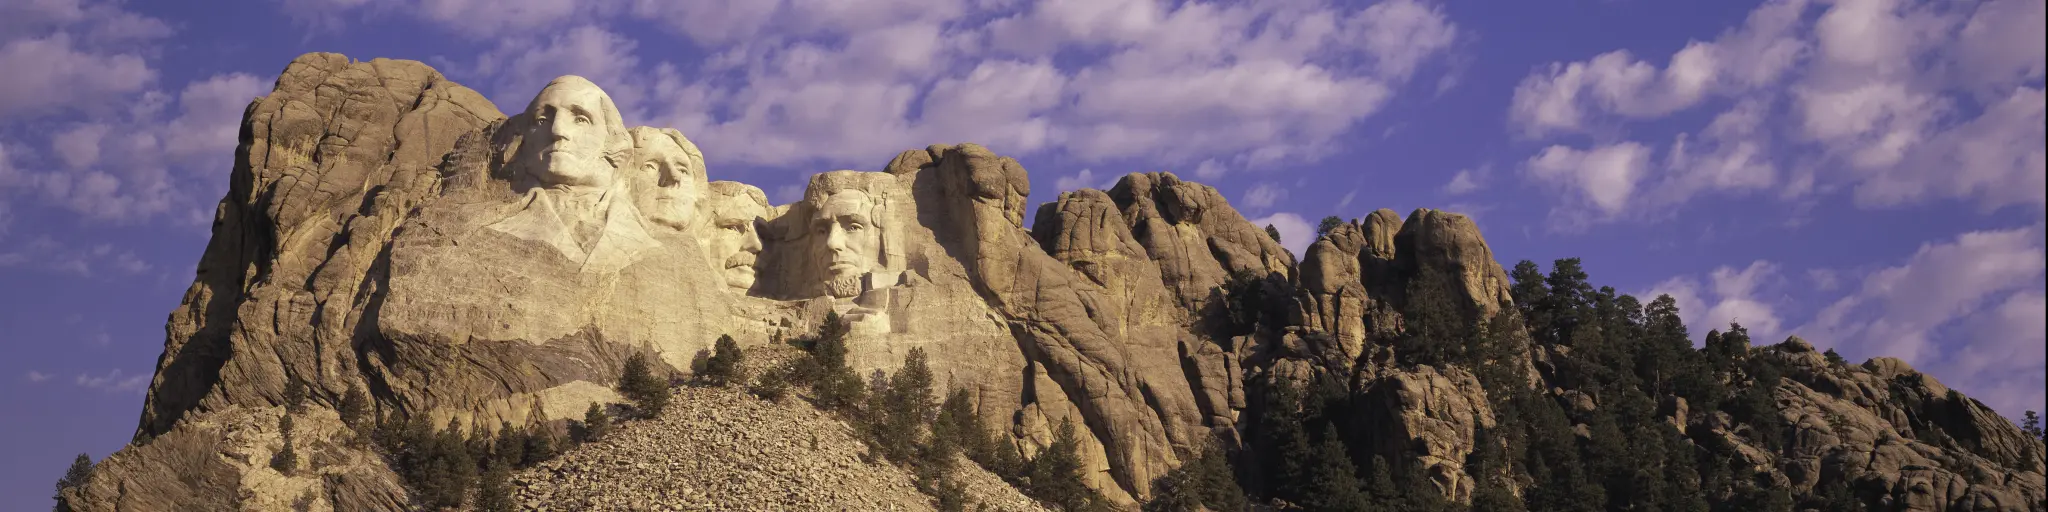 Mount Rushmore, South Dakota, with blue sky and puffy clouds behind